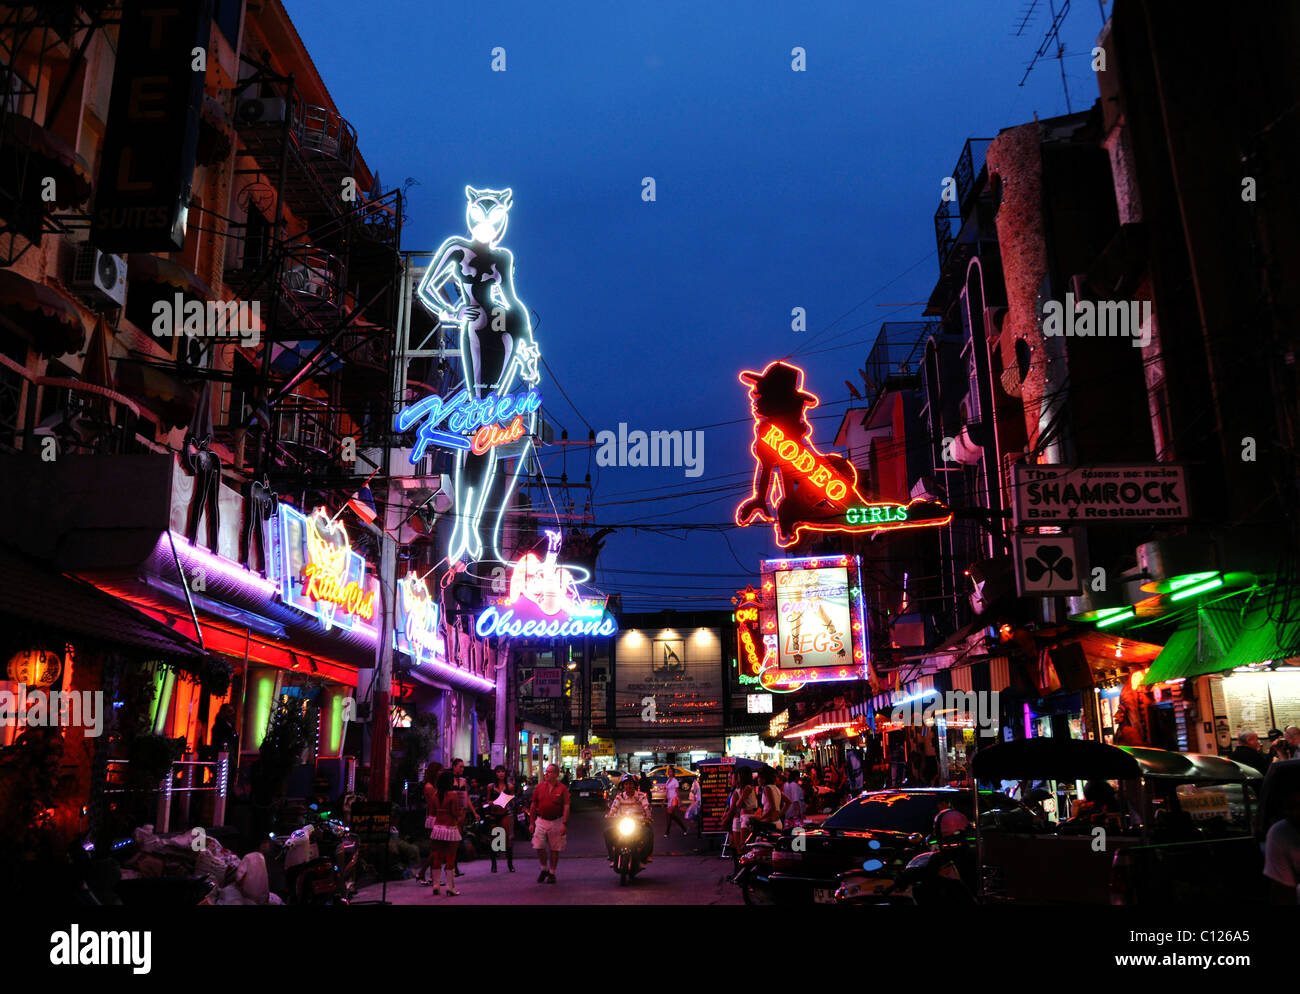 Neon lights Fourth Street Live! at night, a downtown Louisville, Kentucky  complex with restaurants, bars, nightlife, sports and entertainment venues  Stock Photo - Alamy